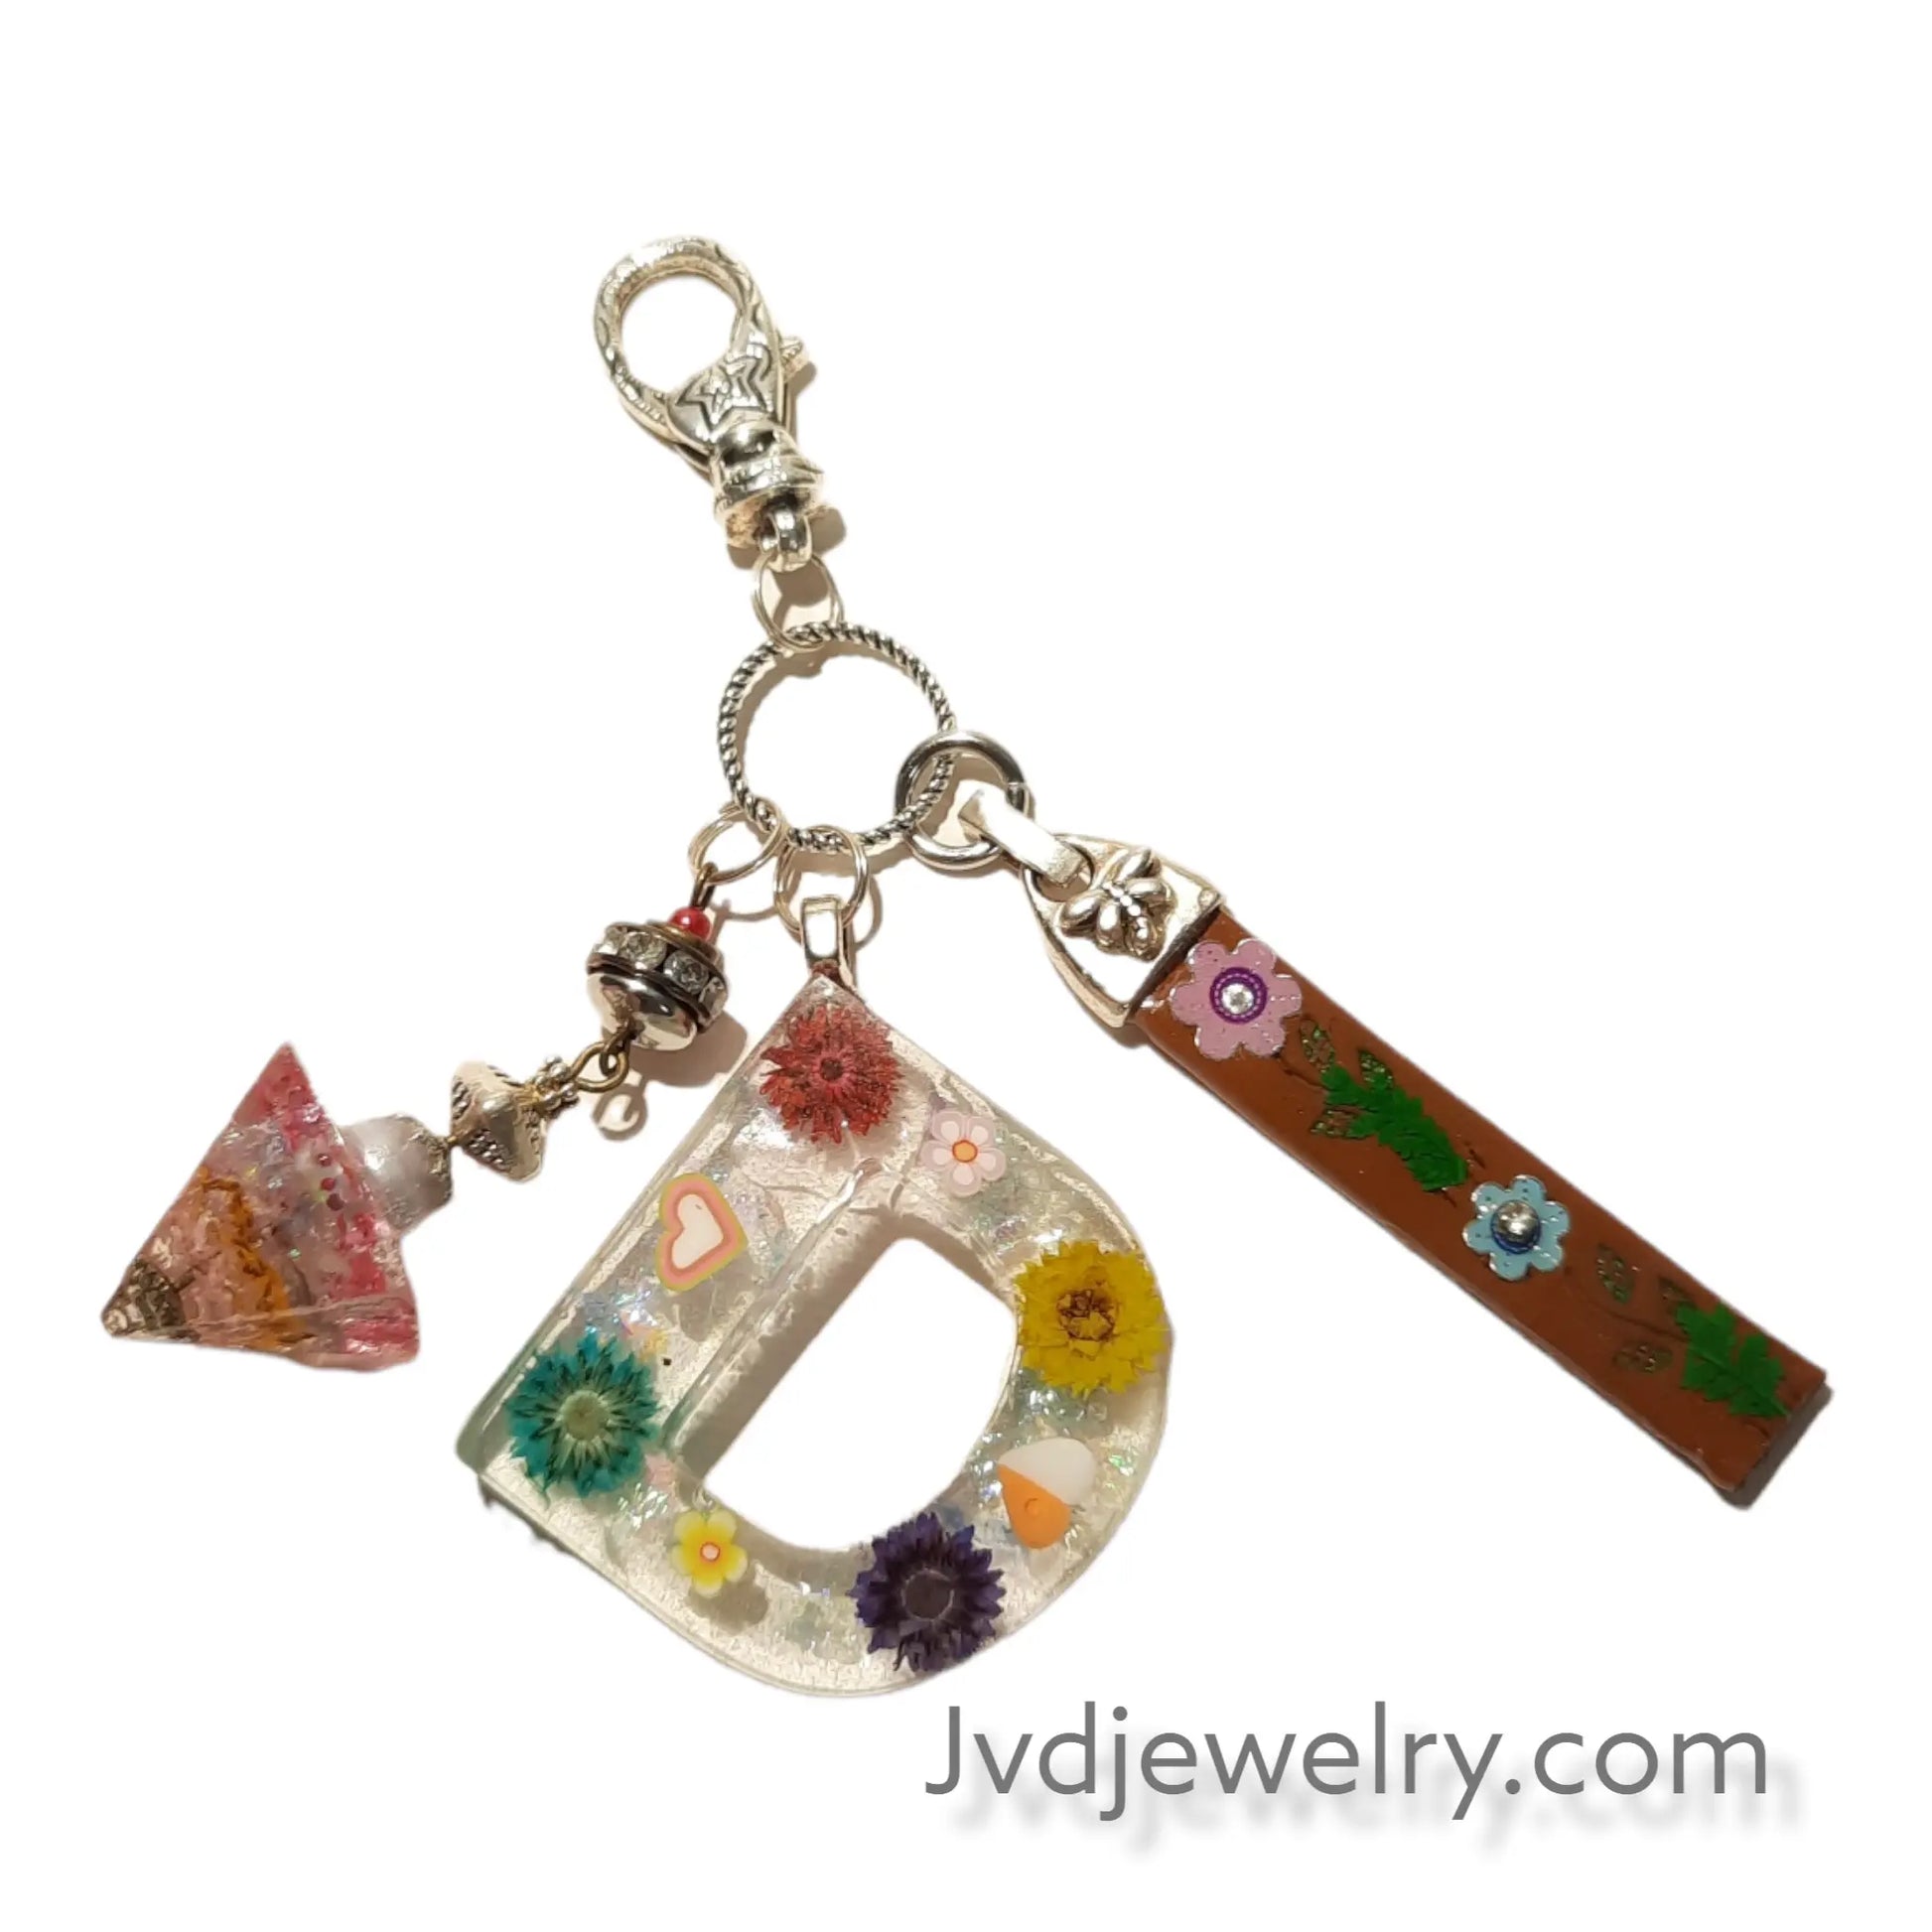 Letter initial resin dried flowers key chain accessories - Image #5